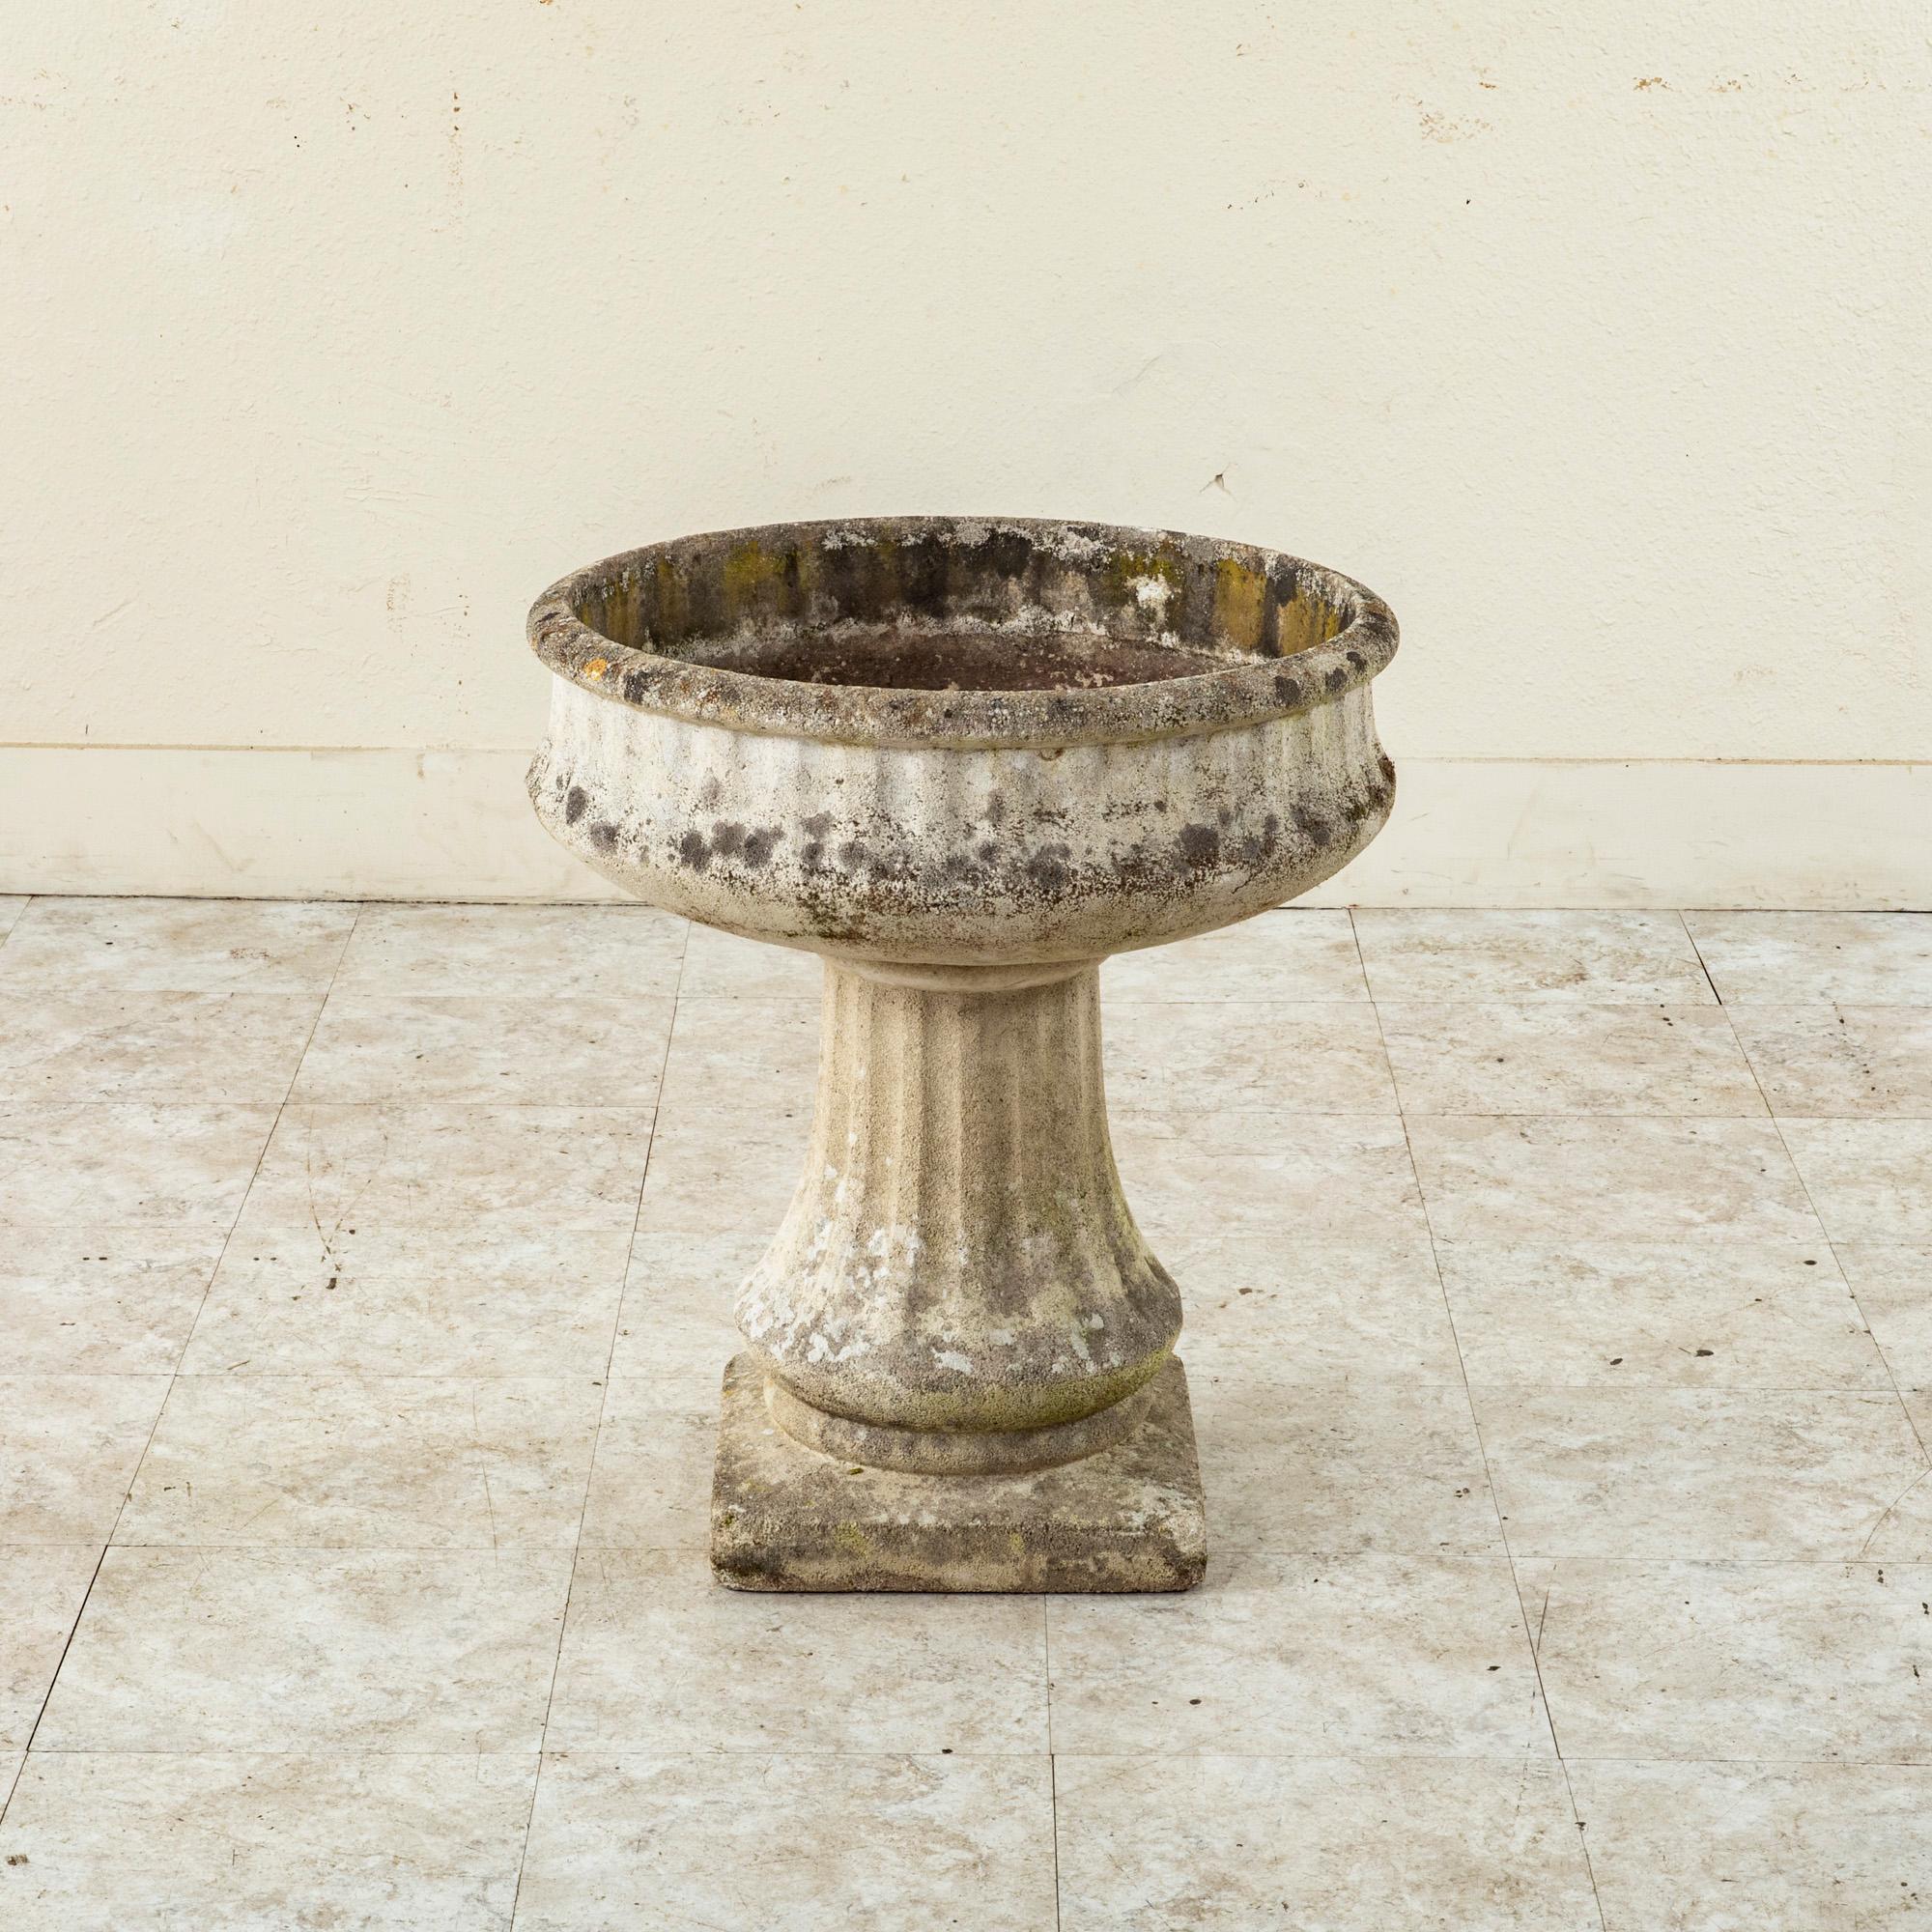 This mid twentieth century French cast stone urn features a fluted basin that rests on a fluted pedestal base. The basin measures 22 inches in diameter and the pedestal rests on a 12.5 inch square base. Vestiges of moss and lichen create a contrast